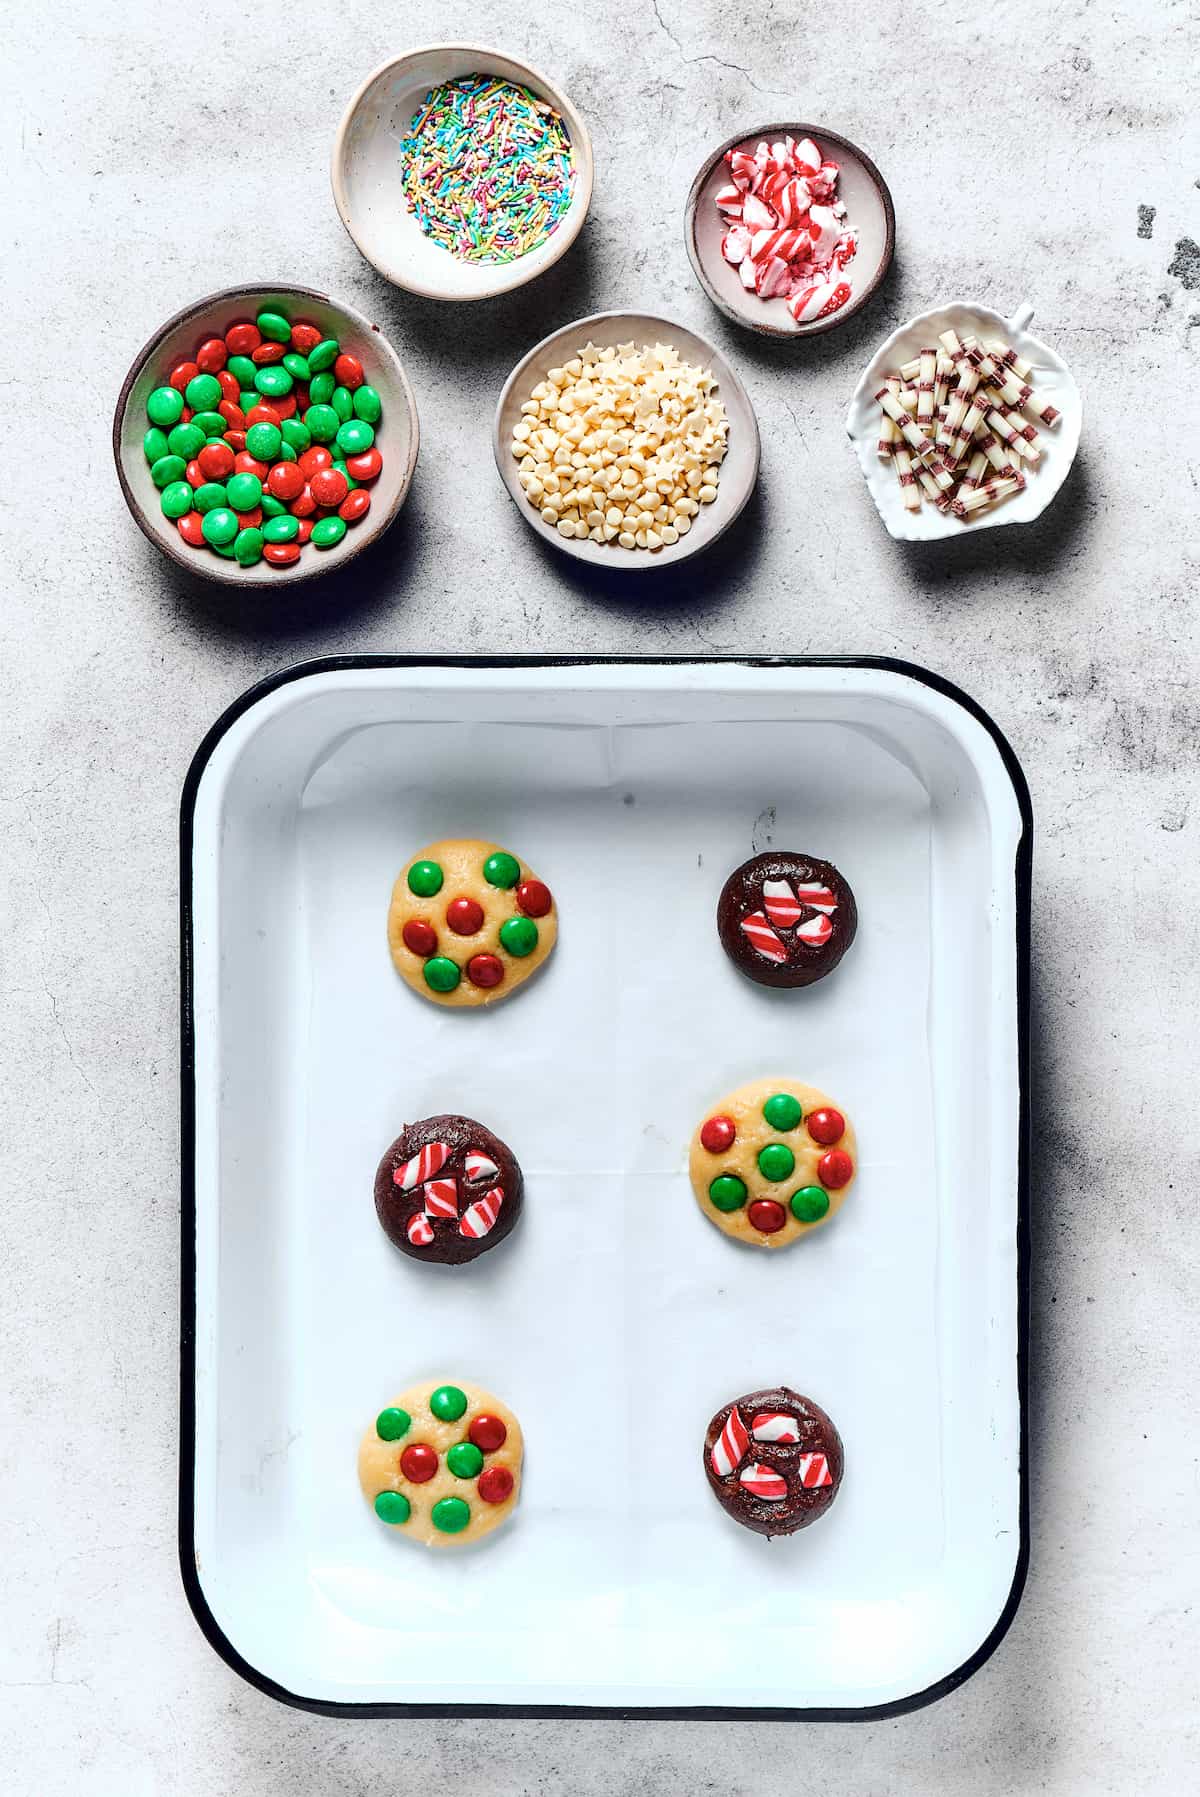 Unbaked chocolate and vanilla cookies on a baking sheet, with M&M's pressed into the dough.